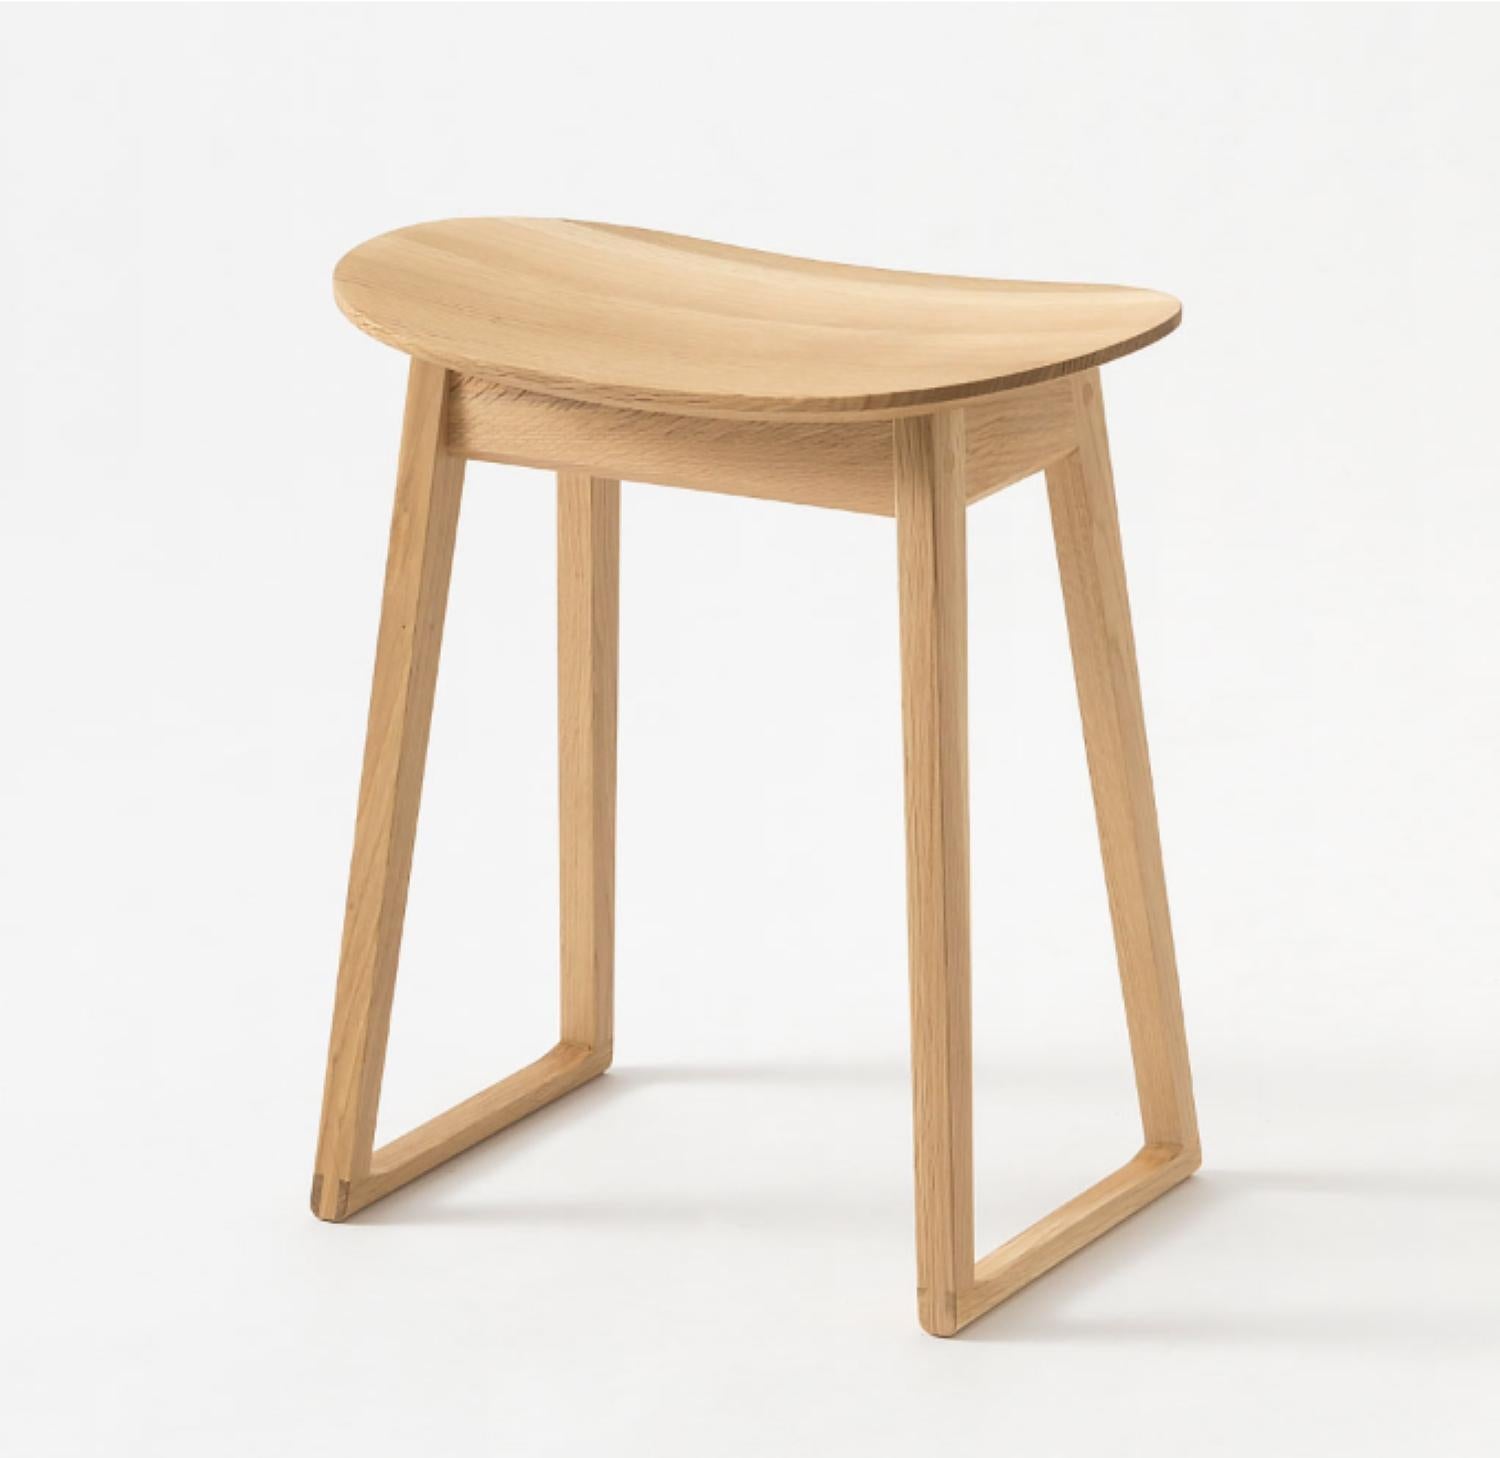 A truly beautiful hand crafted solid oak Stool by HIDA Japan.  The Suwari series is designed with an awareness of vertical flow, blending naturally into both Japanese and modern architectural spaces, and enhancing them.
The weighted design and form